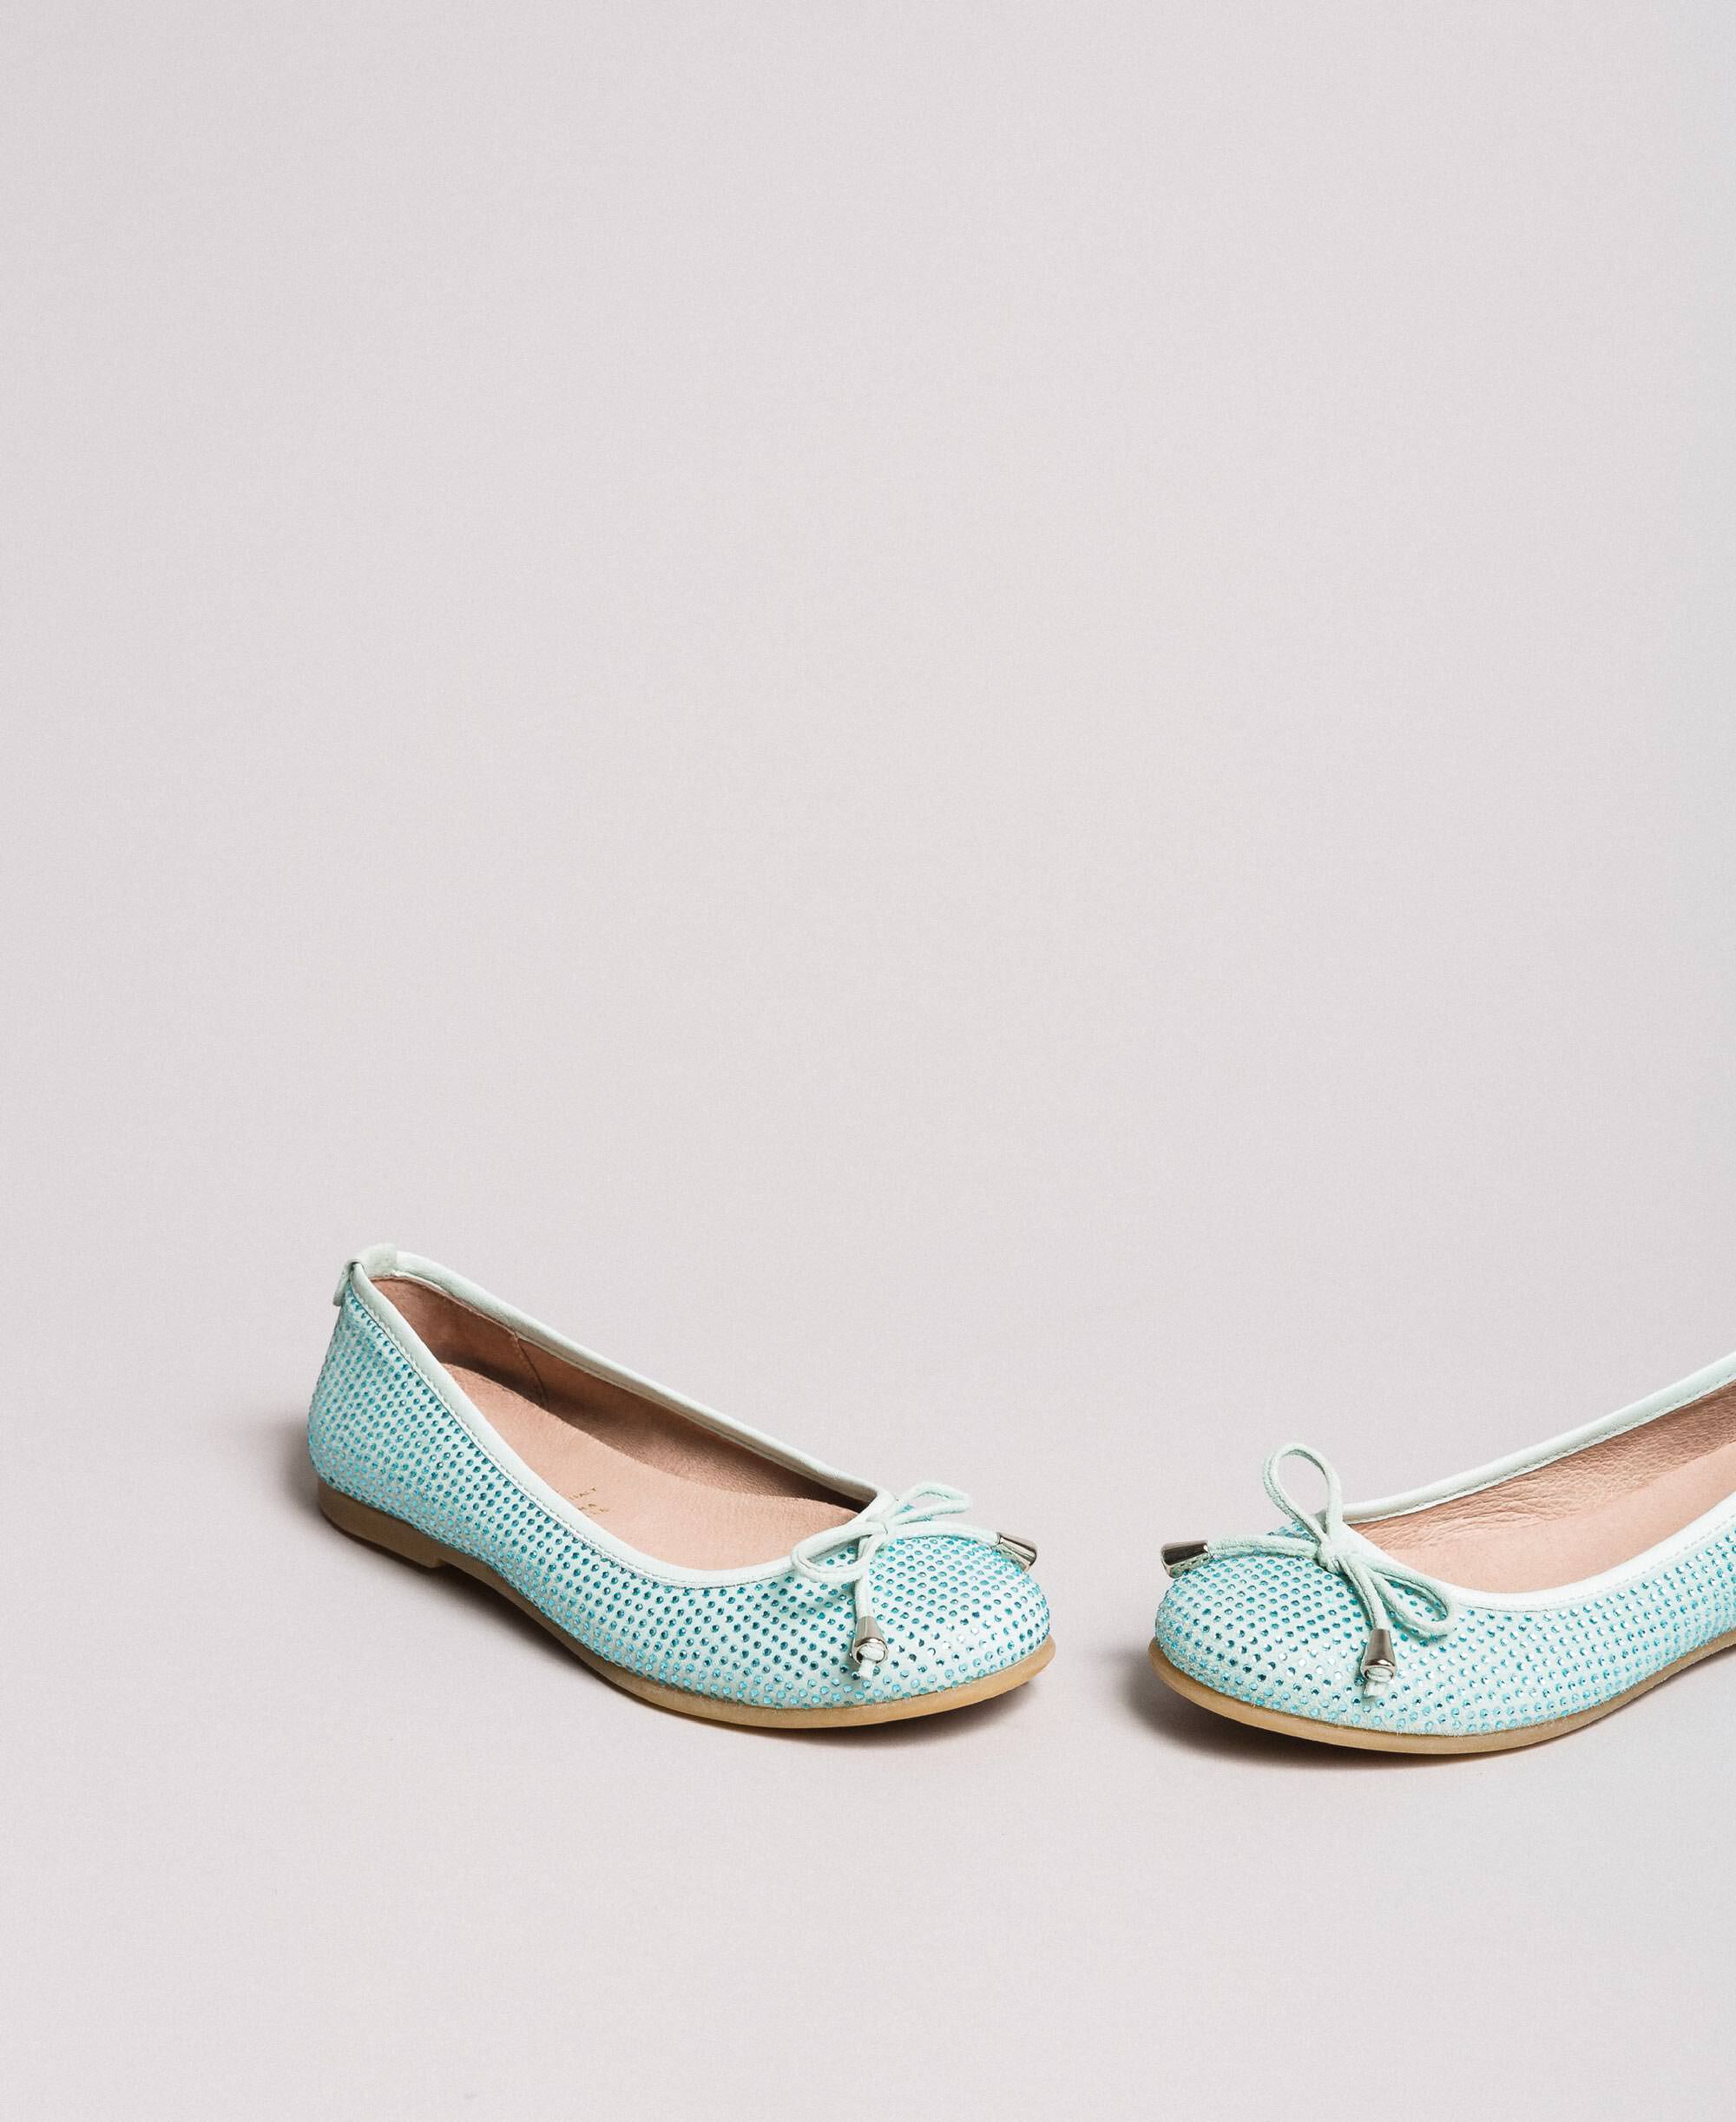 turquoise ballet shoes